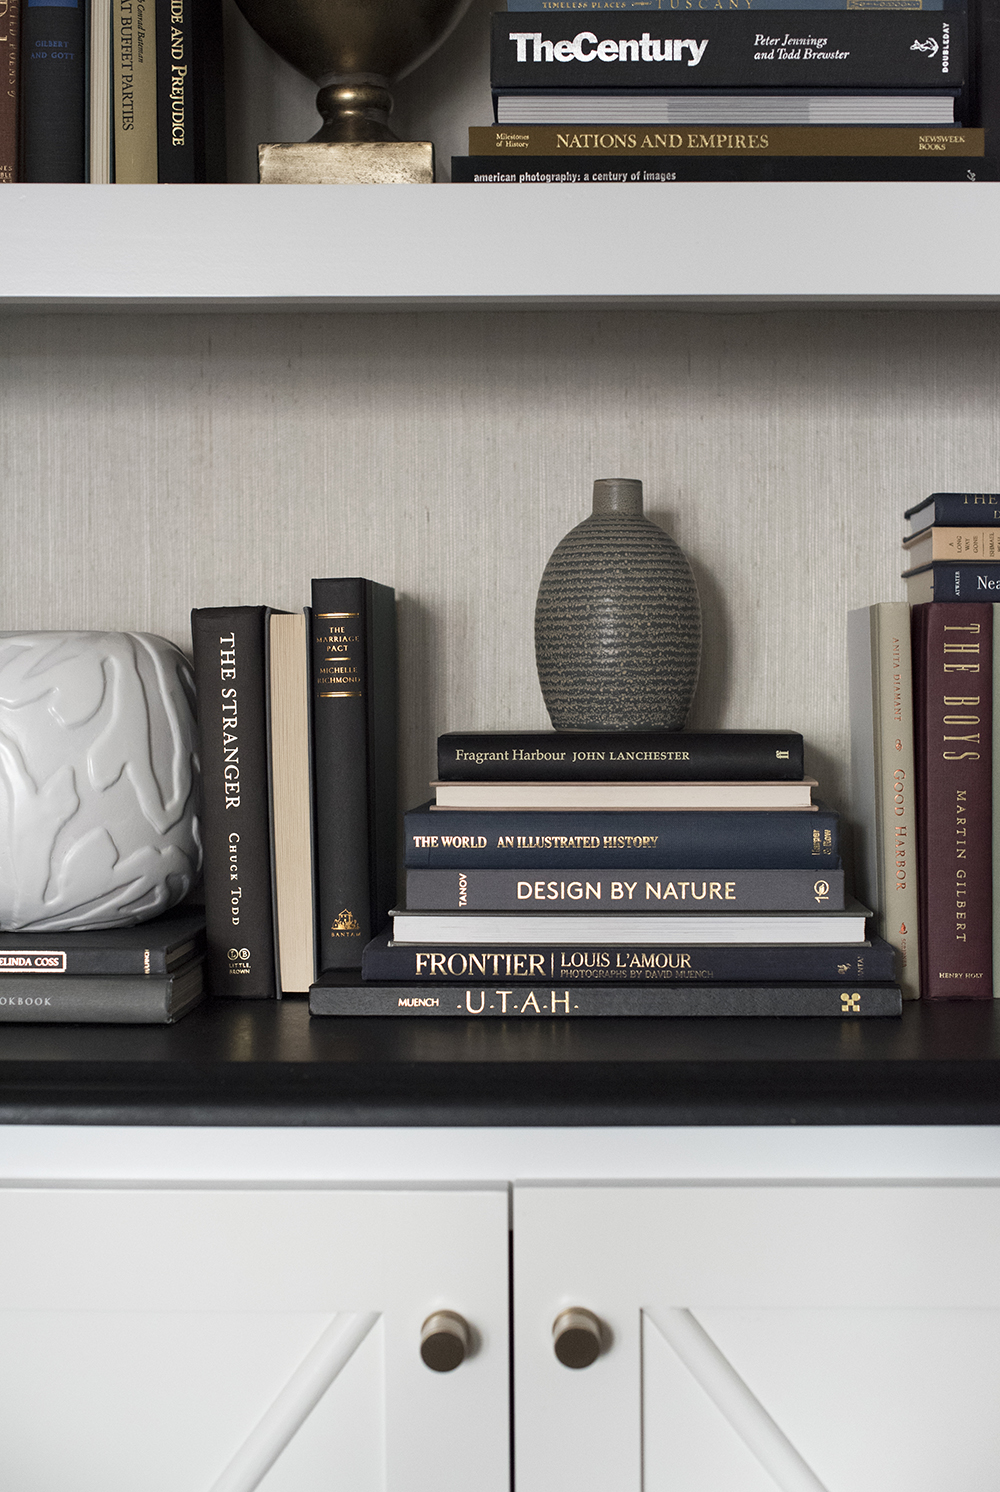 10 Tips for Shelf Styling with Lots of Books - roomfortuesday.com